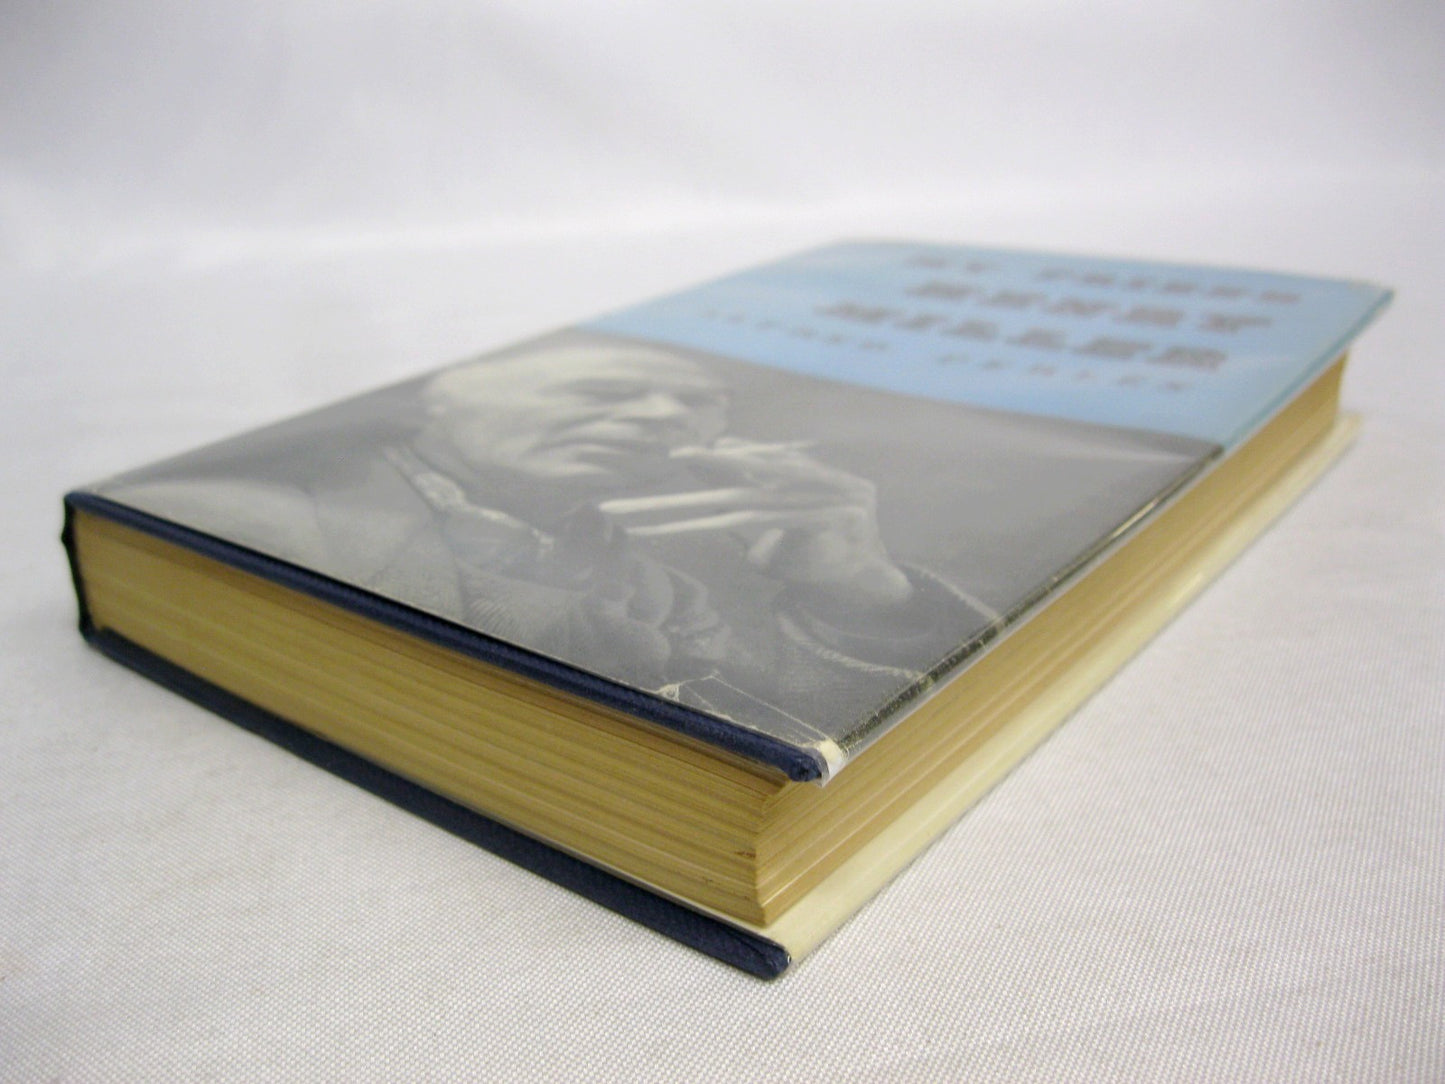 My Friend Henry Miller: an Intimate Biography by Alfred Perles